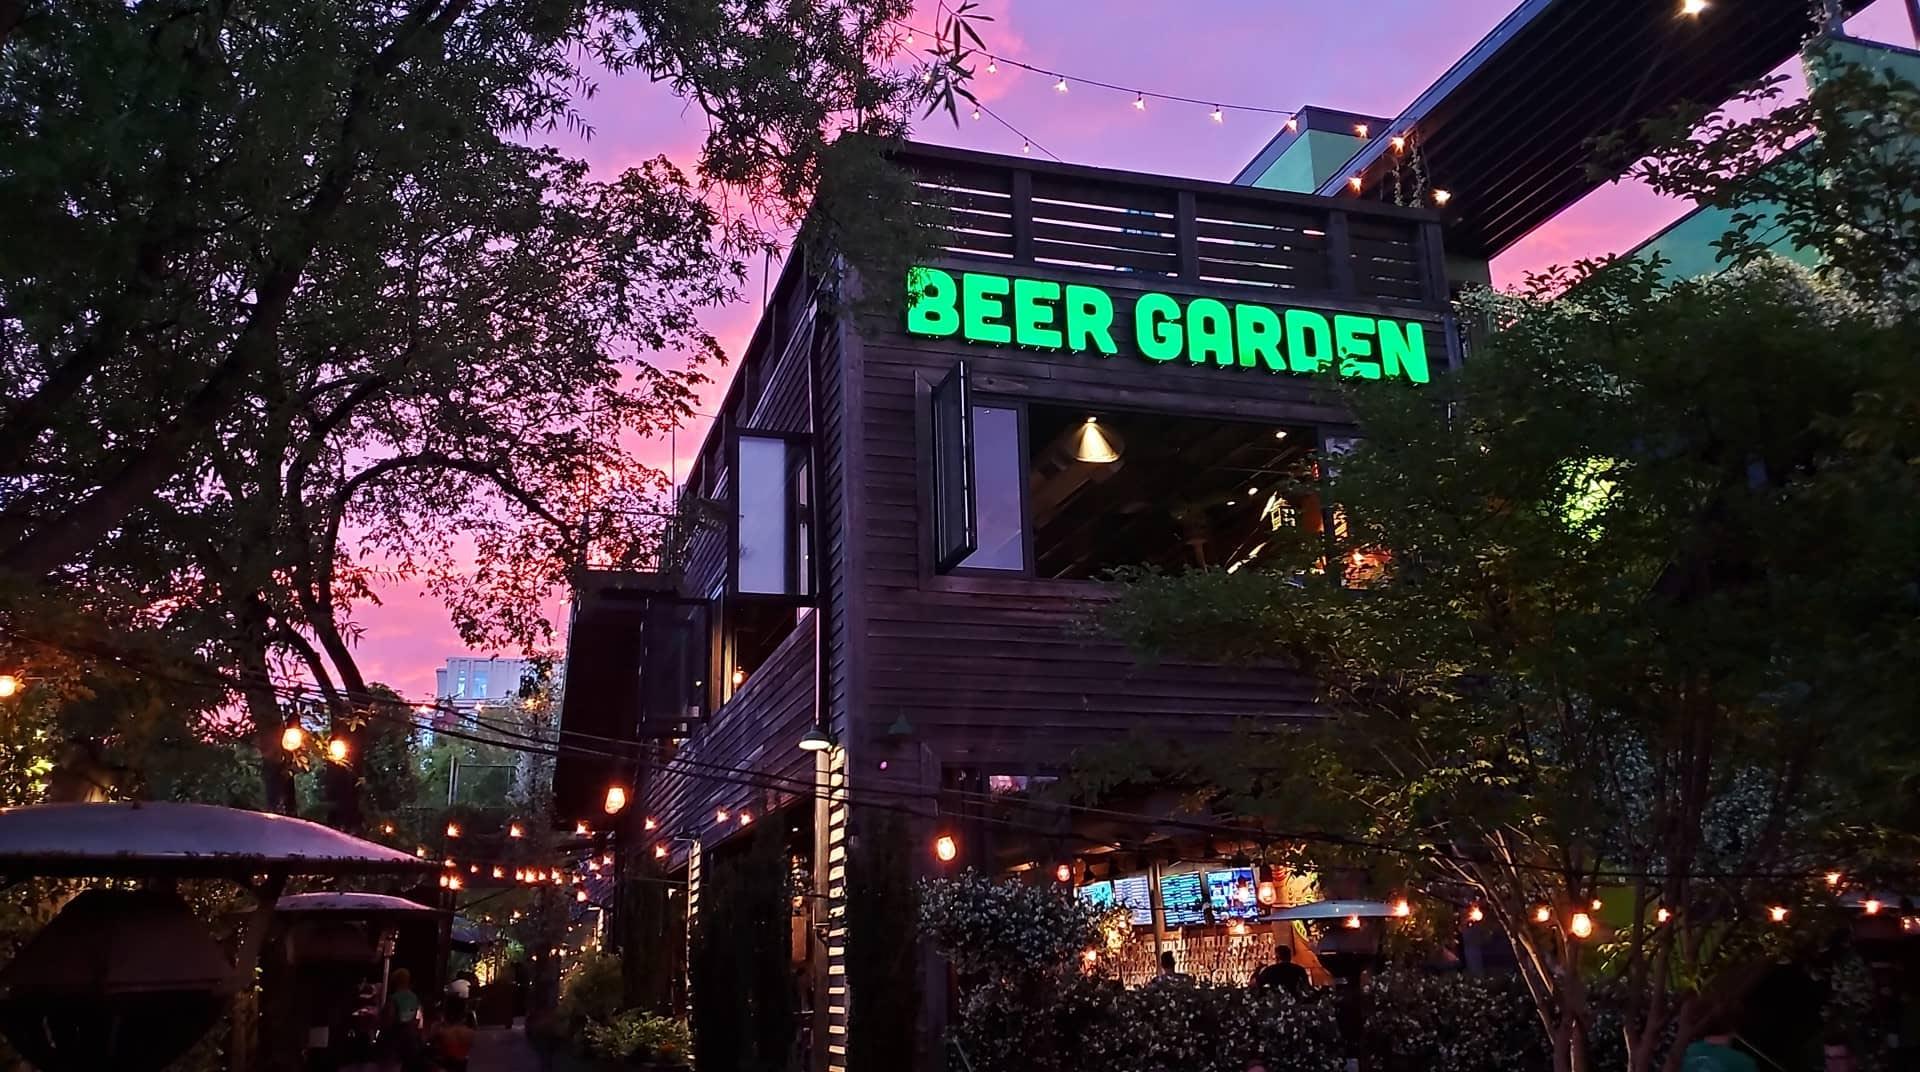 An evening spent at the Raleigh Beer Garden is just one of the many fun things to do in downtown Raleigh and one of the best rooftop bars in Raleigh NC.